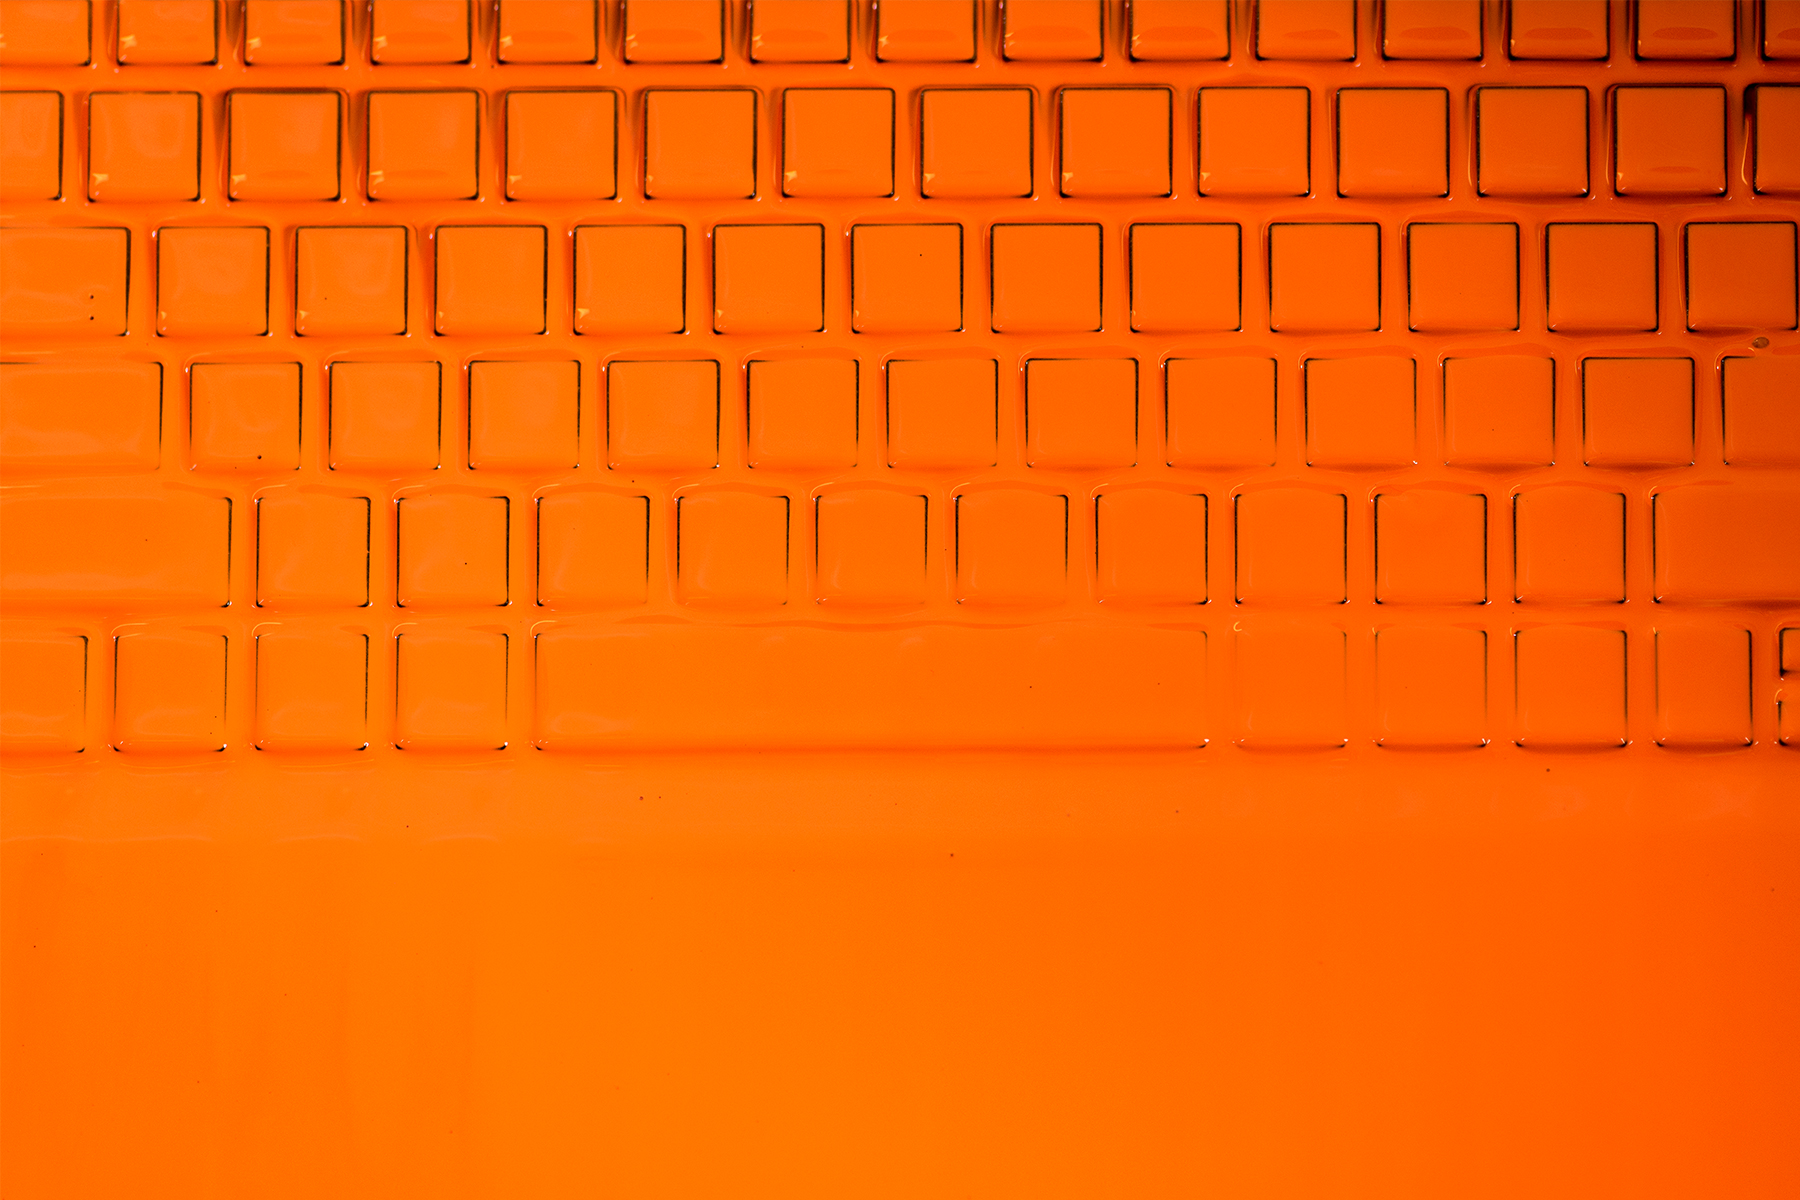 Keyboard covered with orange paint